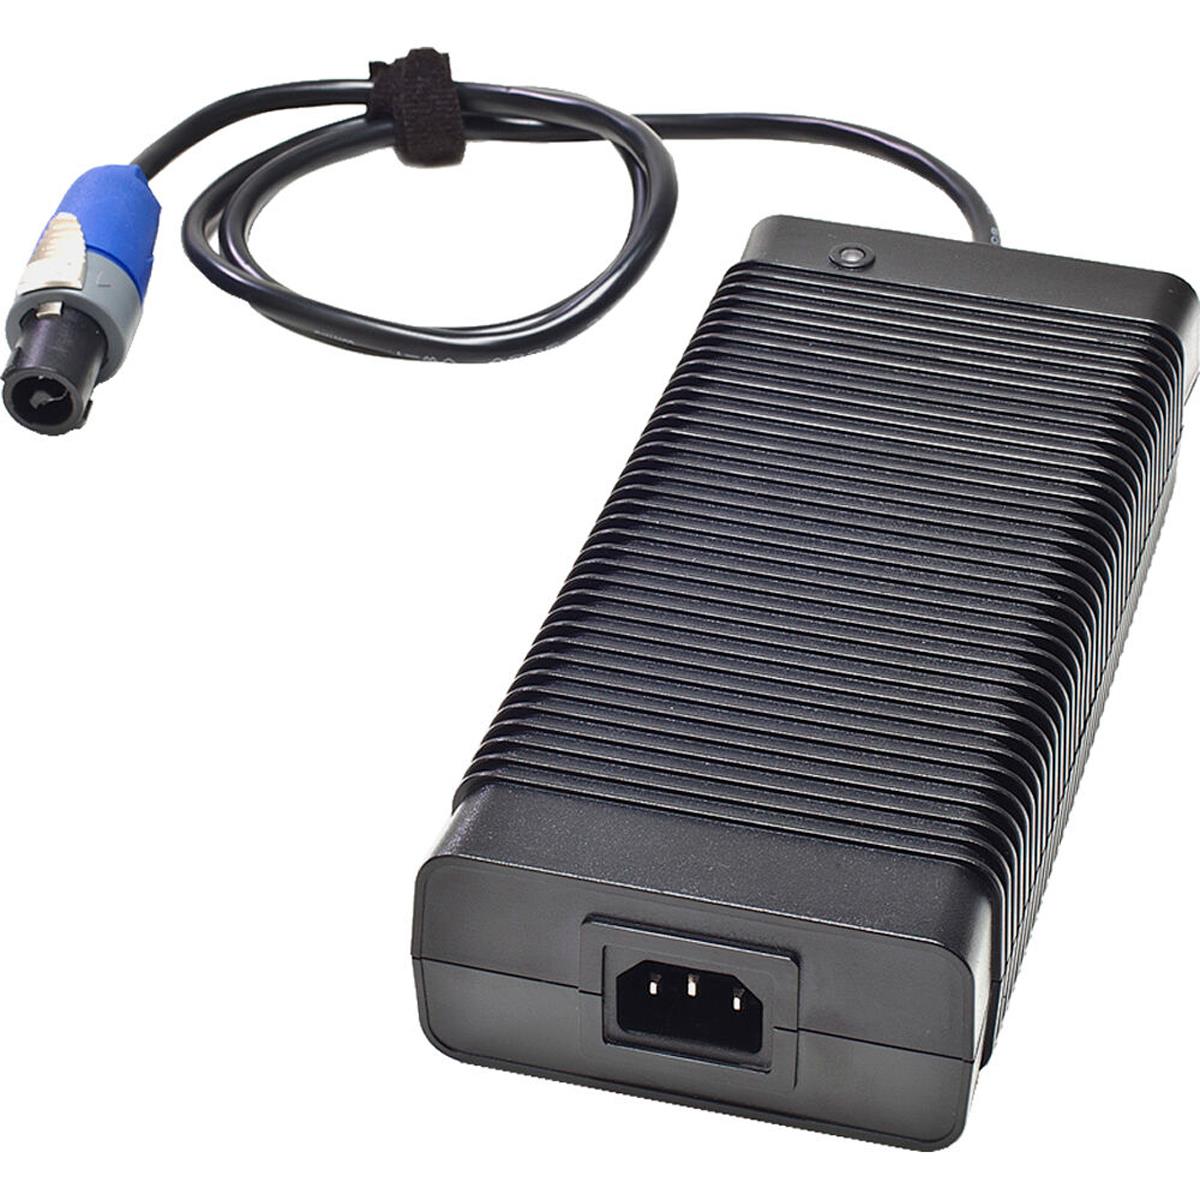 Image of Carpet Light 24V 220W AC Power Supply with speakON Connector for CL42 Lamp Head